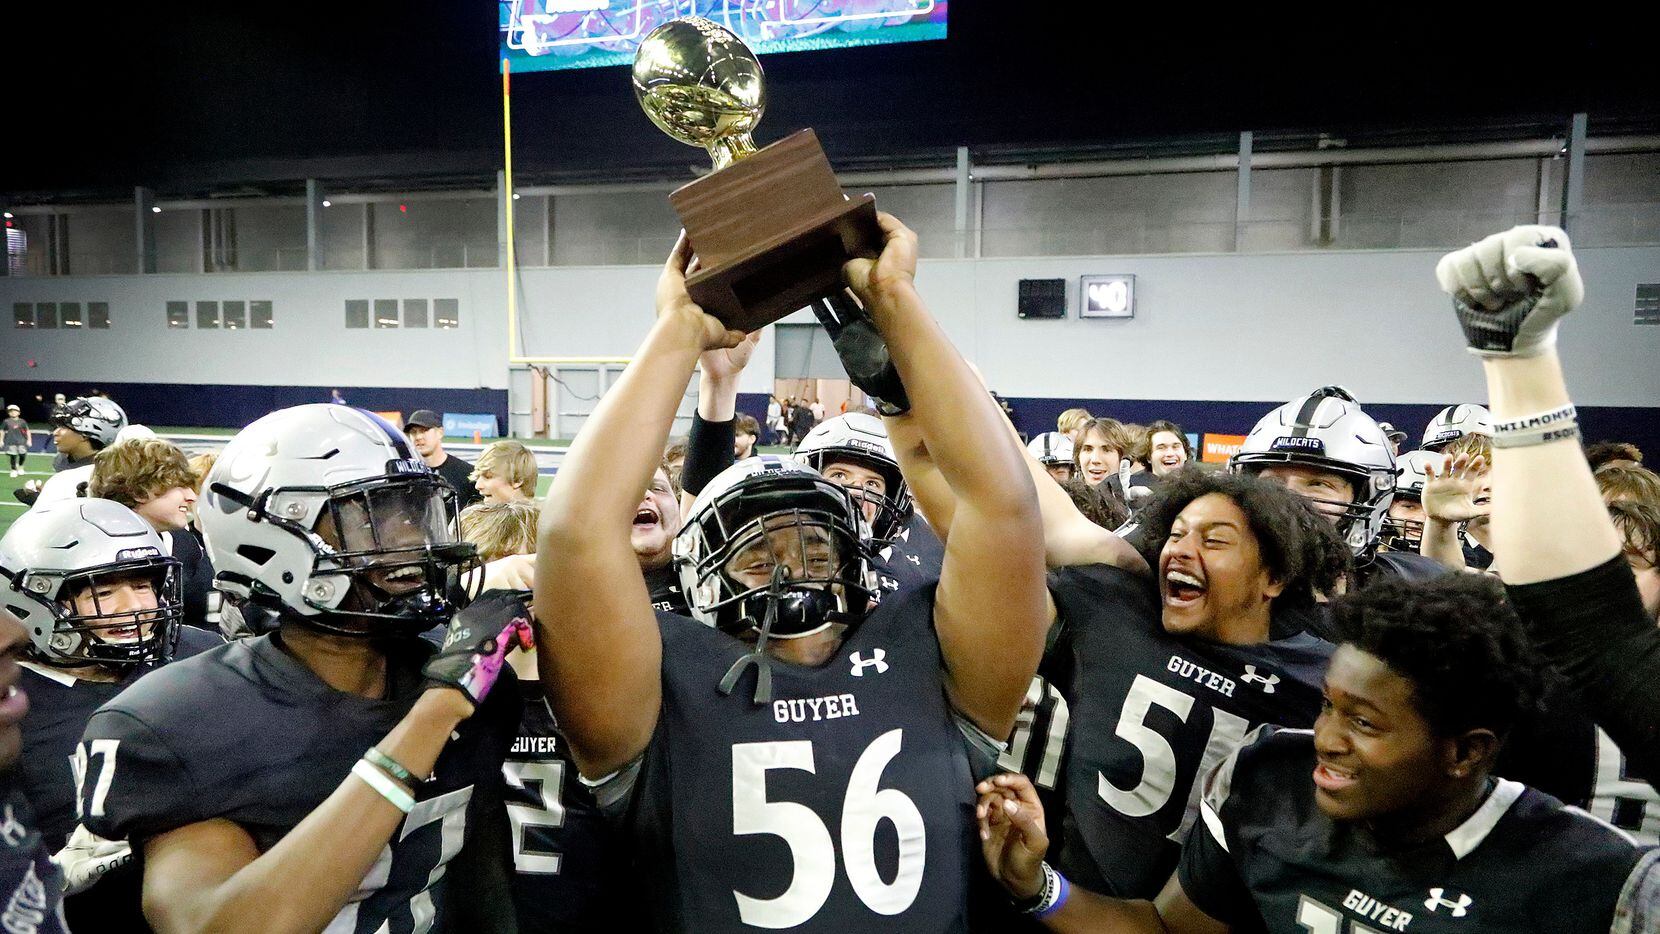 Guyer High School defensive lineman Dynell Neal (56) hoists up the trophy after the win as...